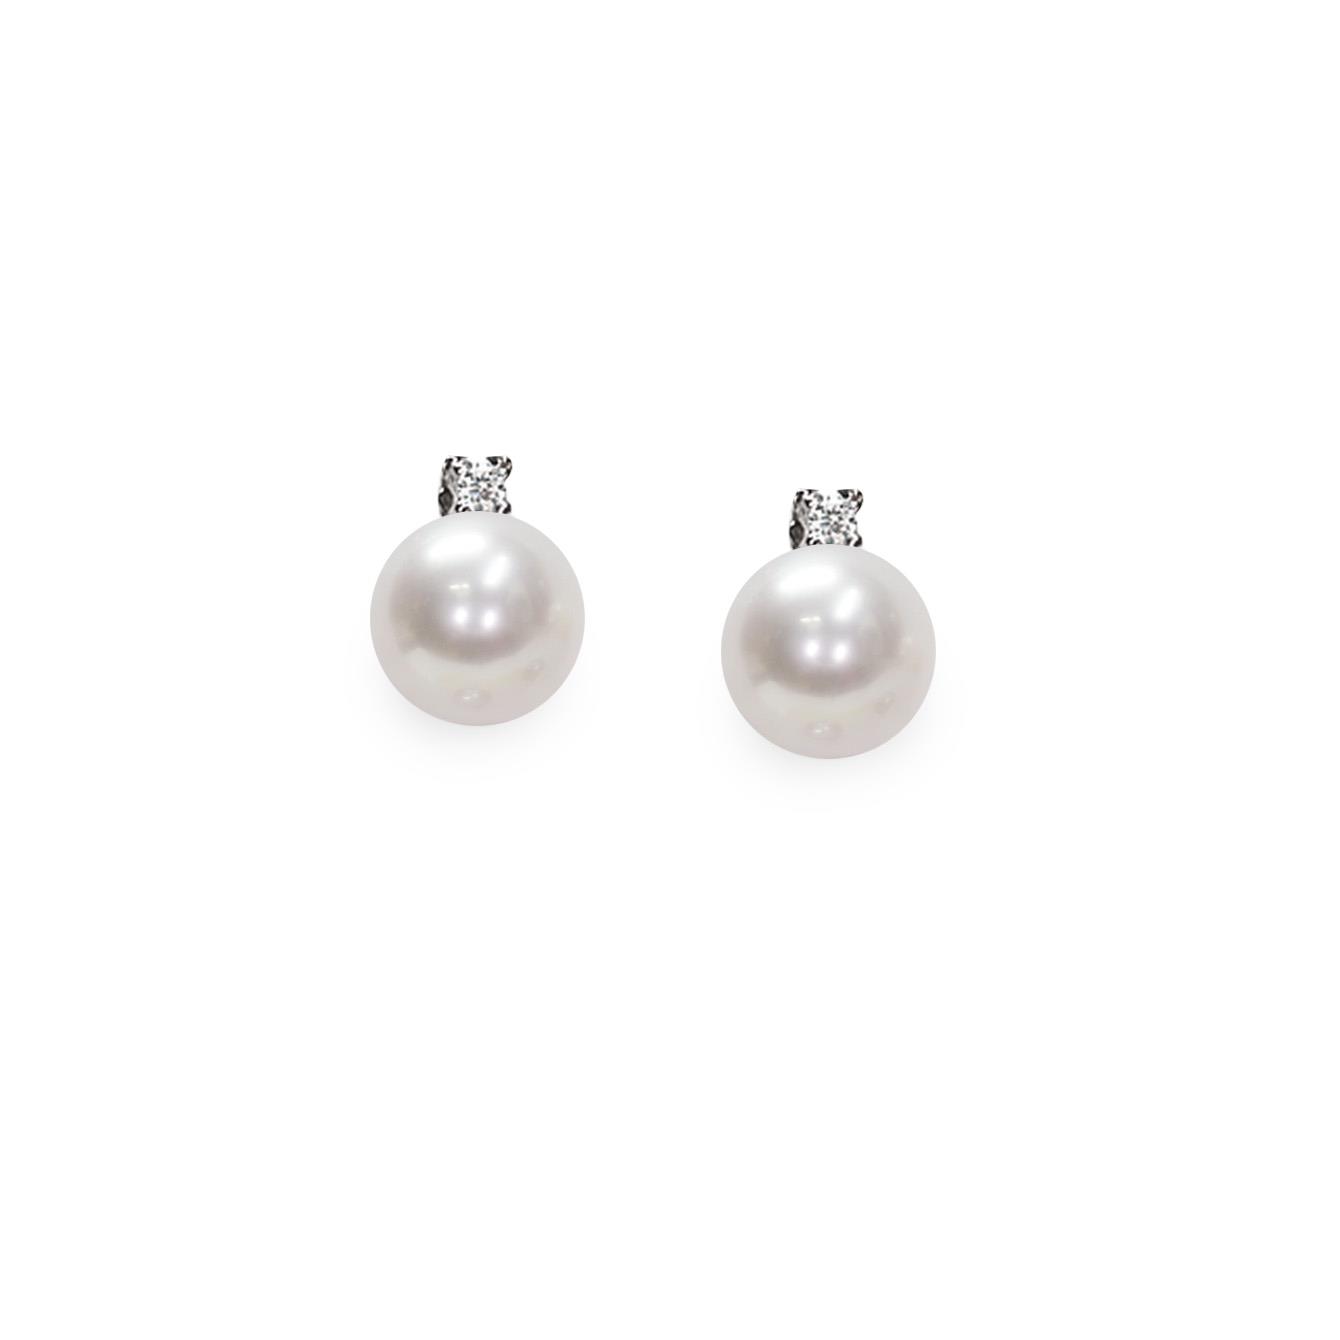 18kt white gold stud earrings with pearls and diamonds - MAYUMI